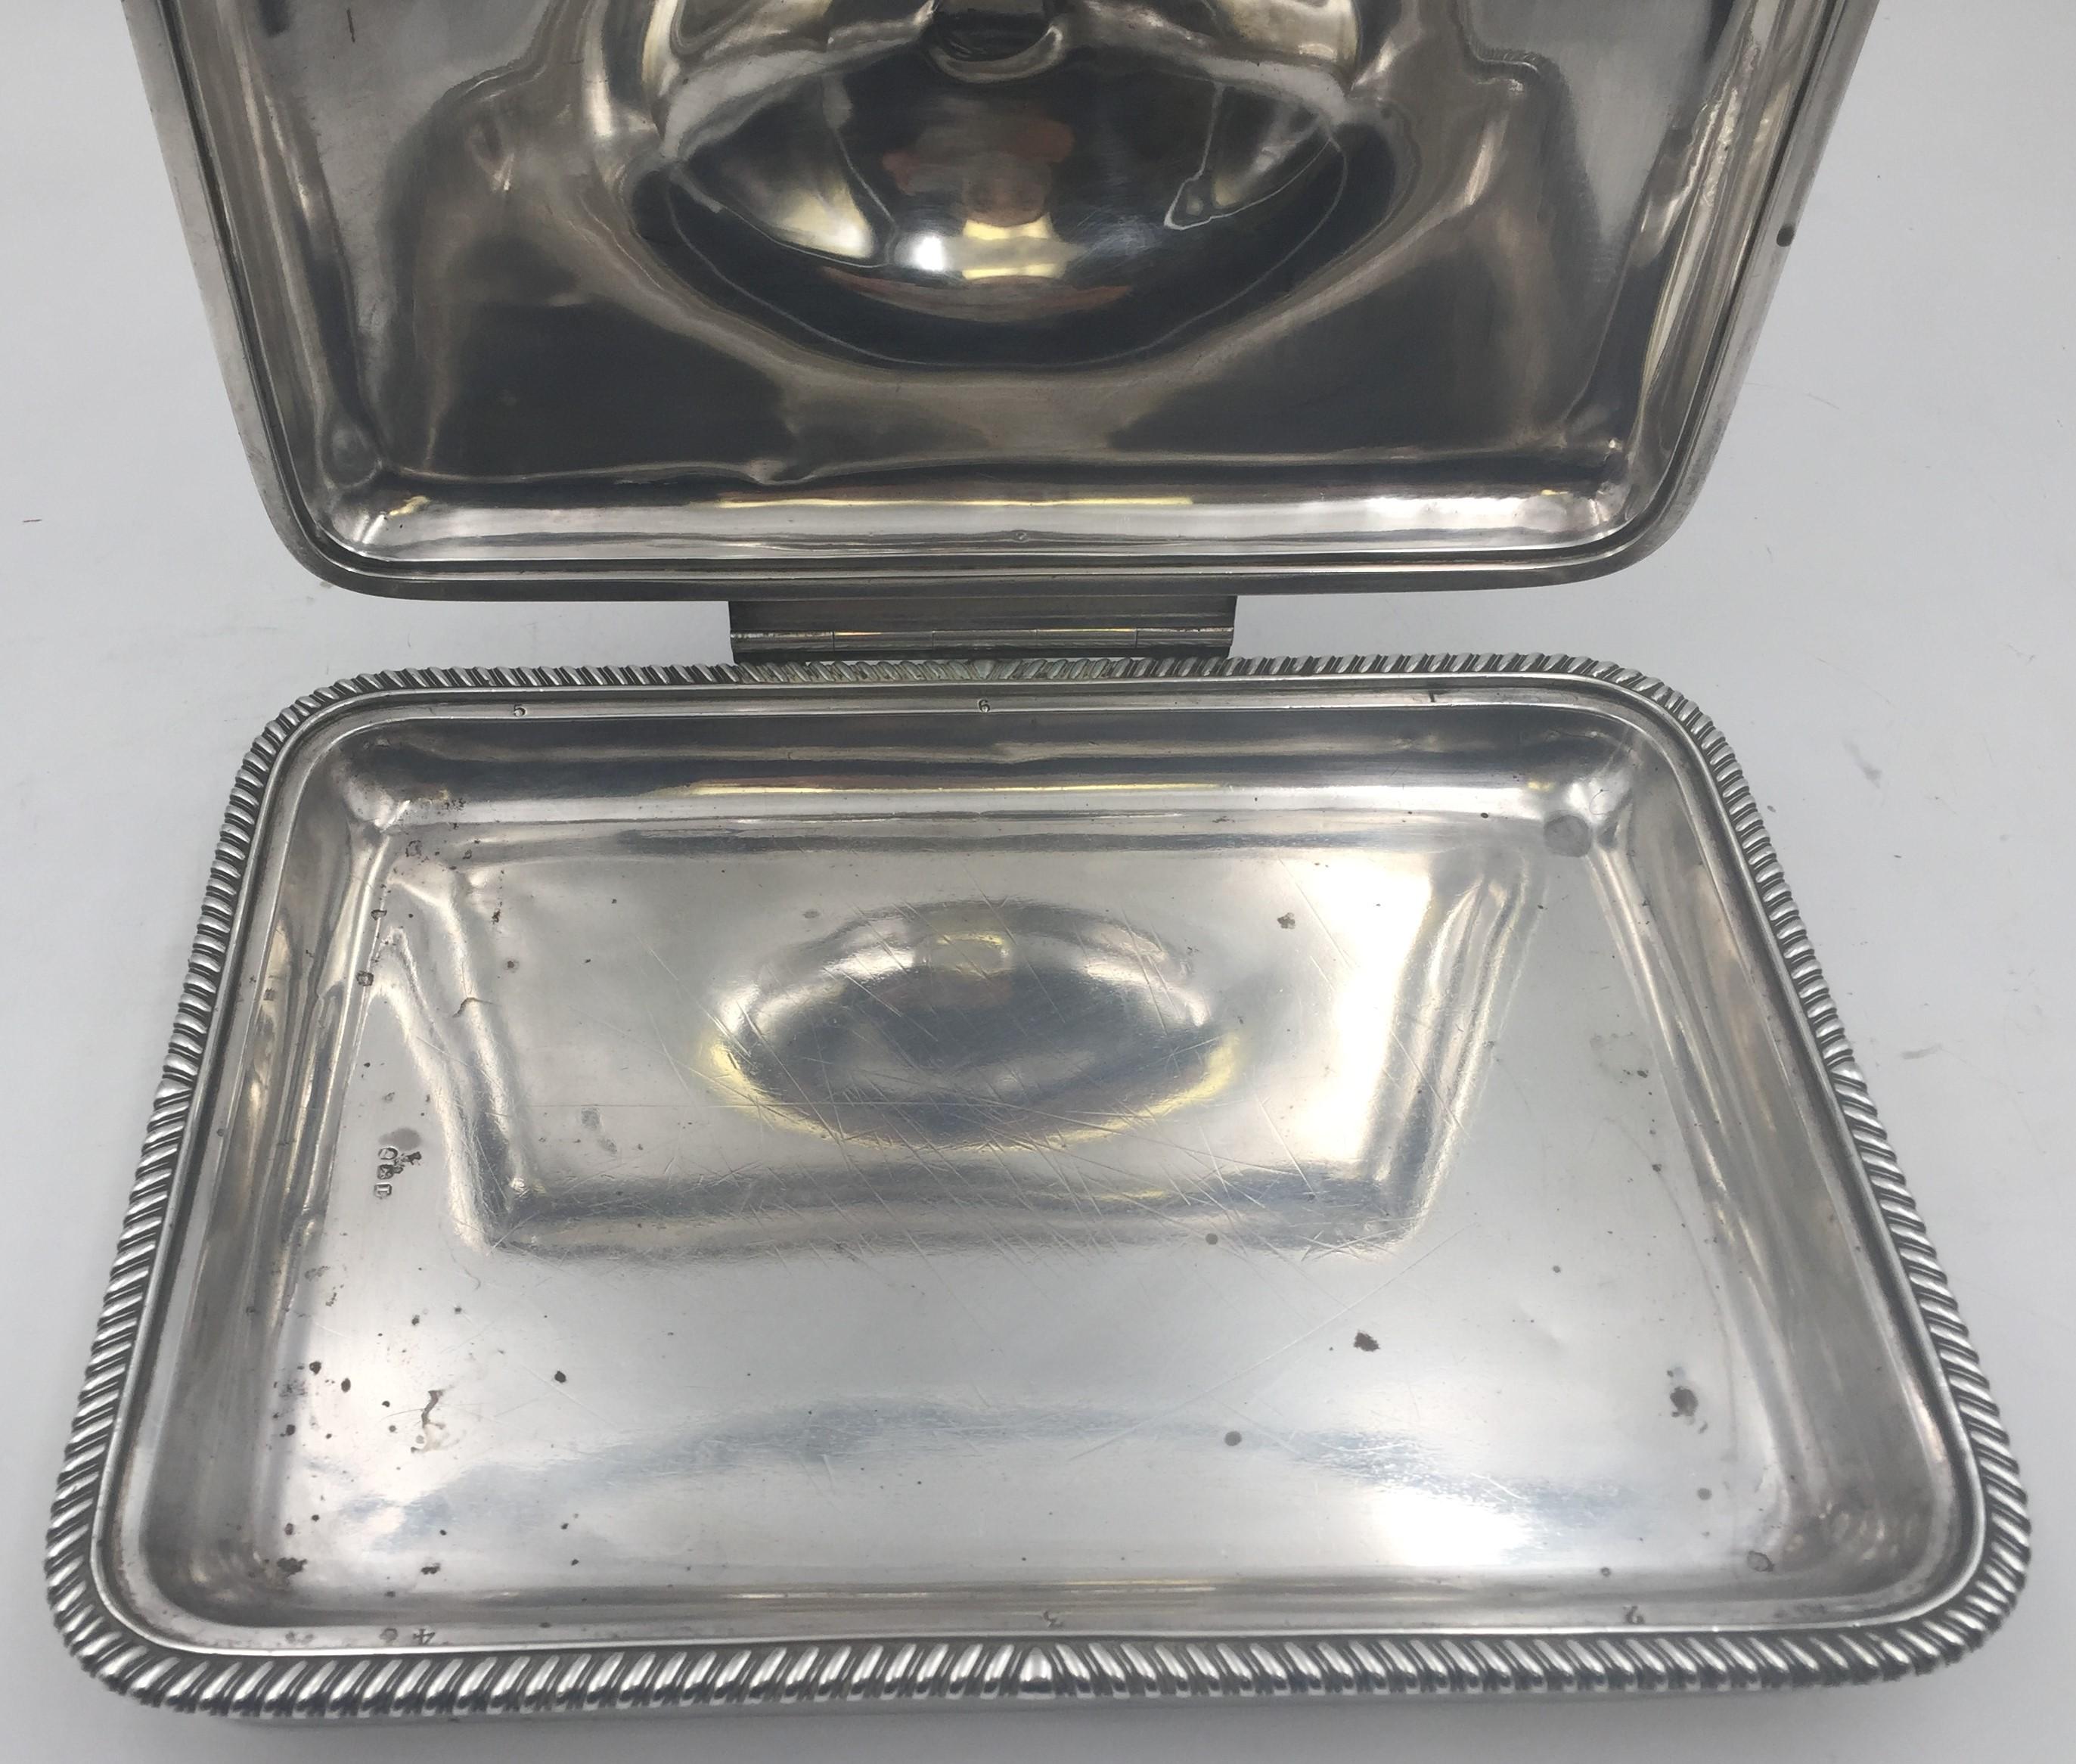 Robert Garrard, 1806 sterling silver cheese warmer dish in Georgian style. It has a rectangular shape with a gadrooned border and a slightly domed cover with an urn finial and a turned wood handle, measures 10'' by 7 1/4'' in width (14'' approx.